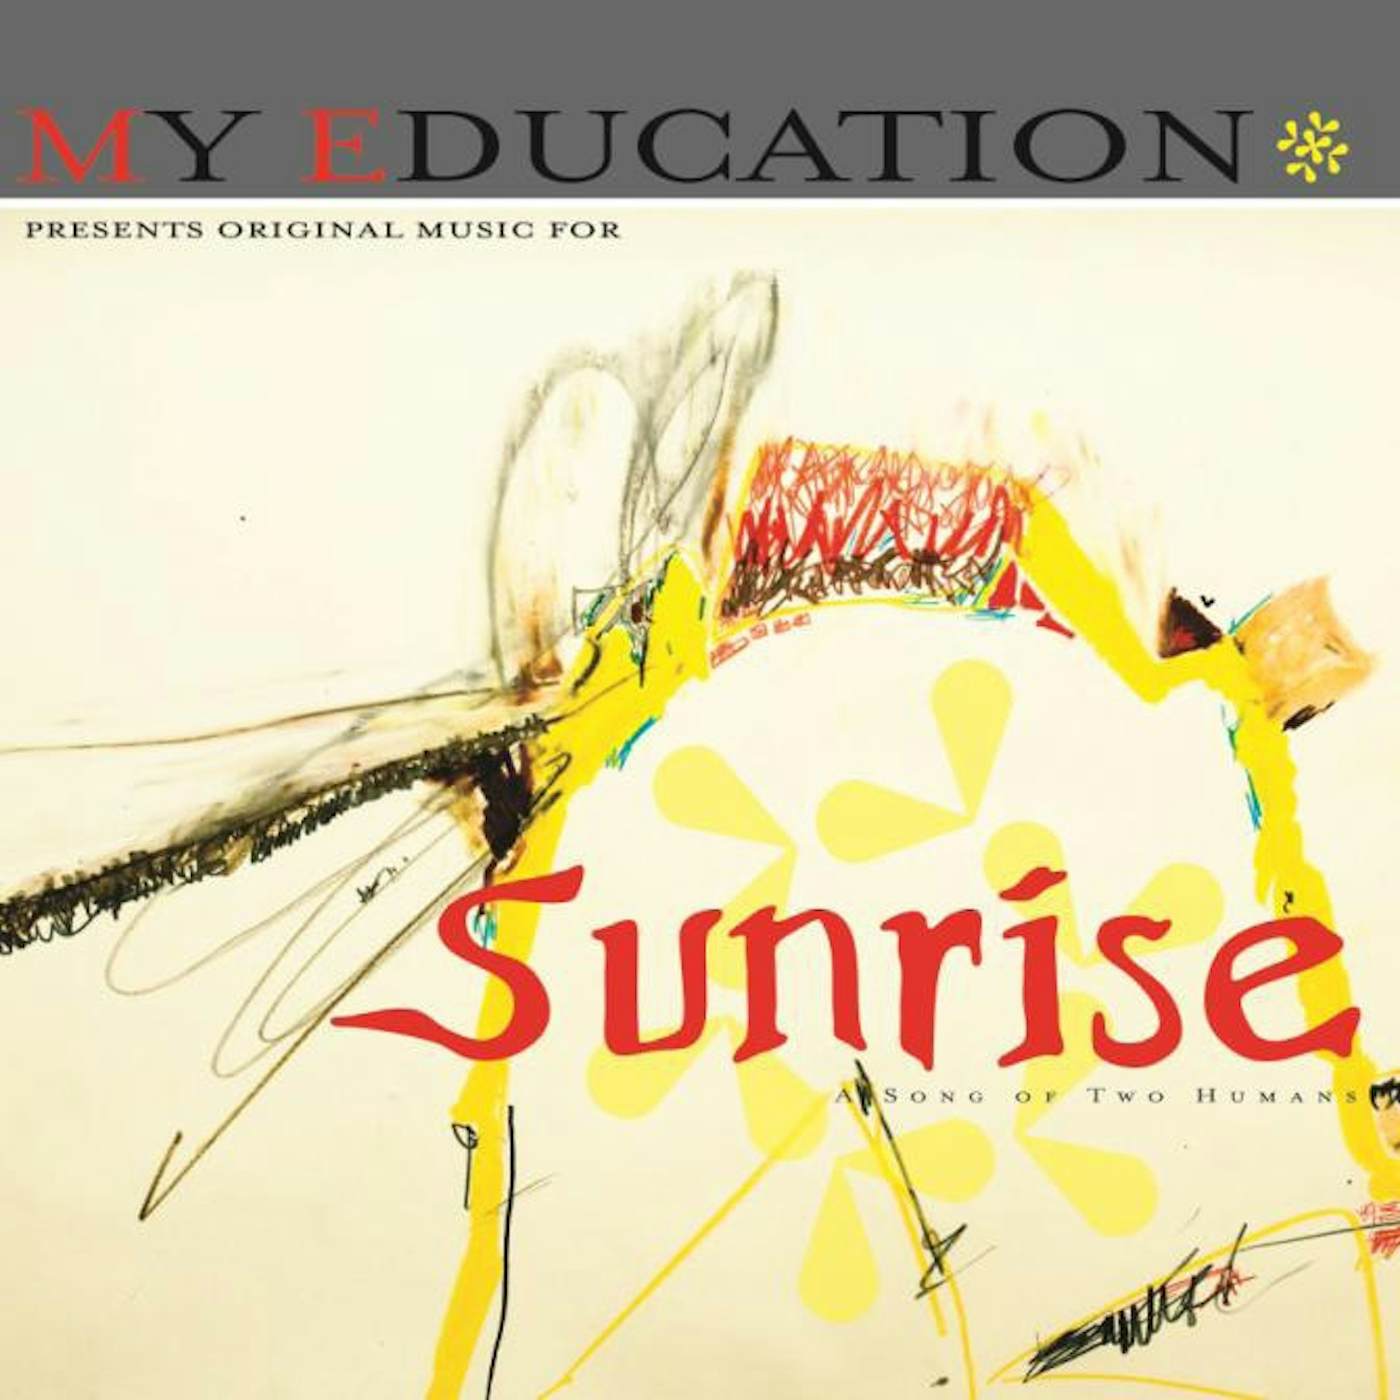 My Education SUNRISE Vinyl Record - Digital Download Included